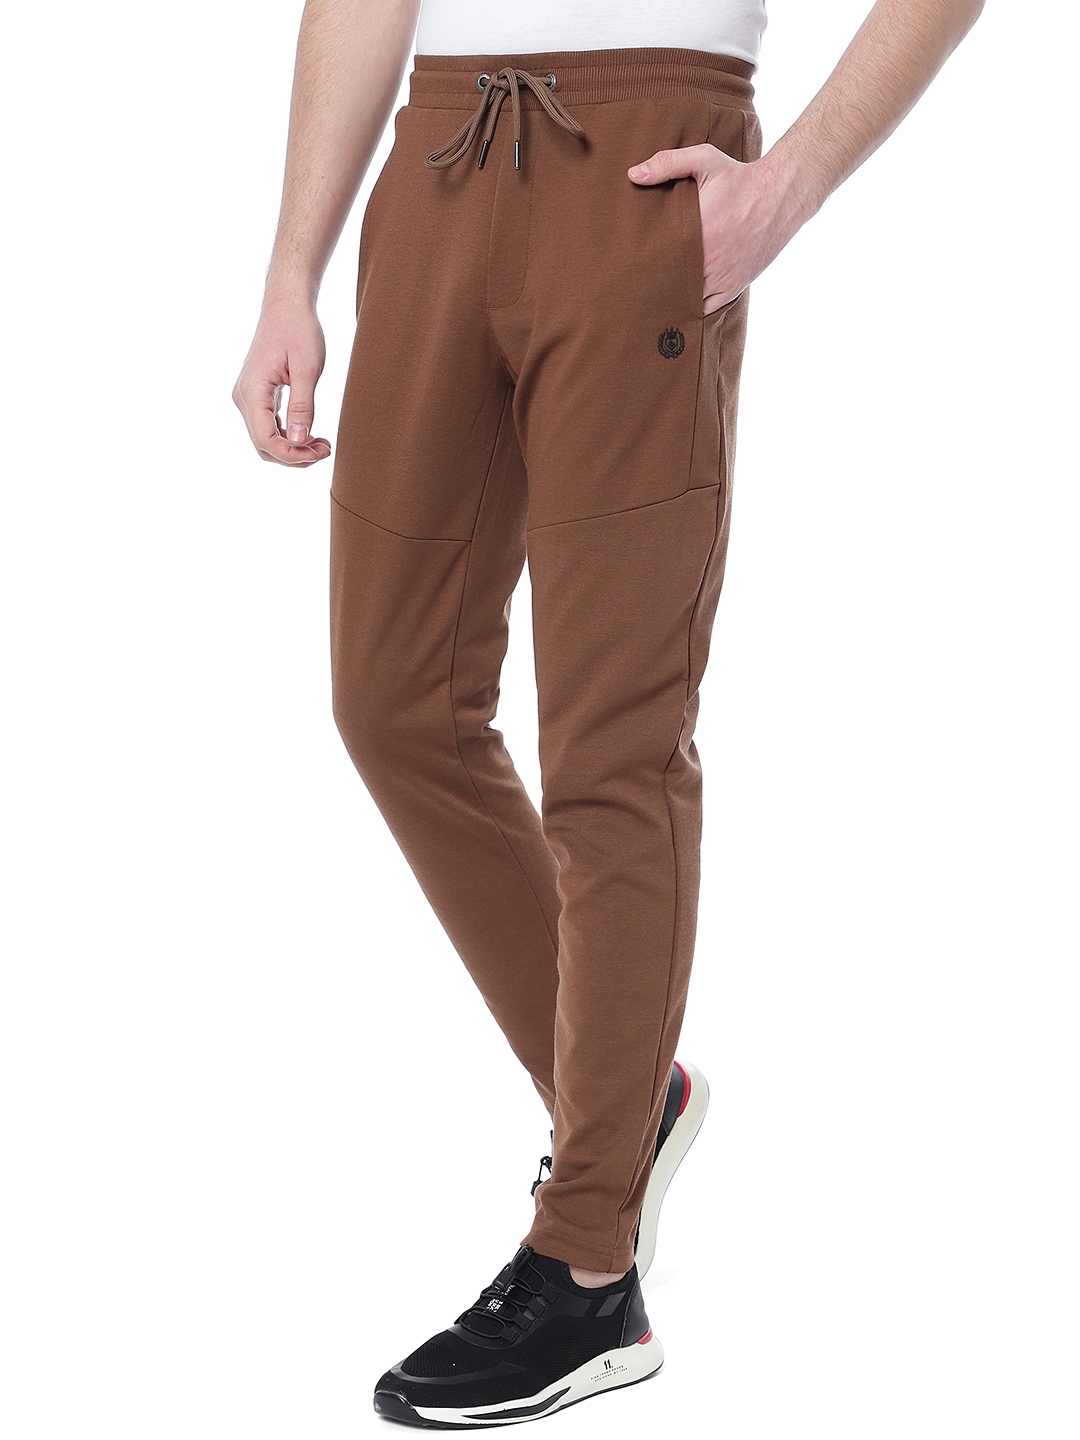 Greenfibre | Coffee Brown Solid Slim Fit Track Pant | Greenfibre 1